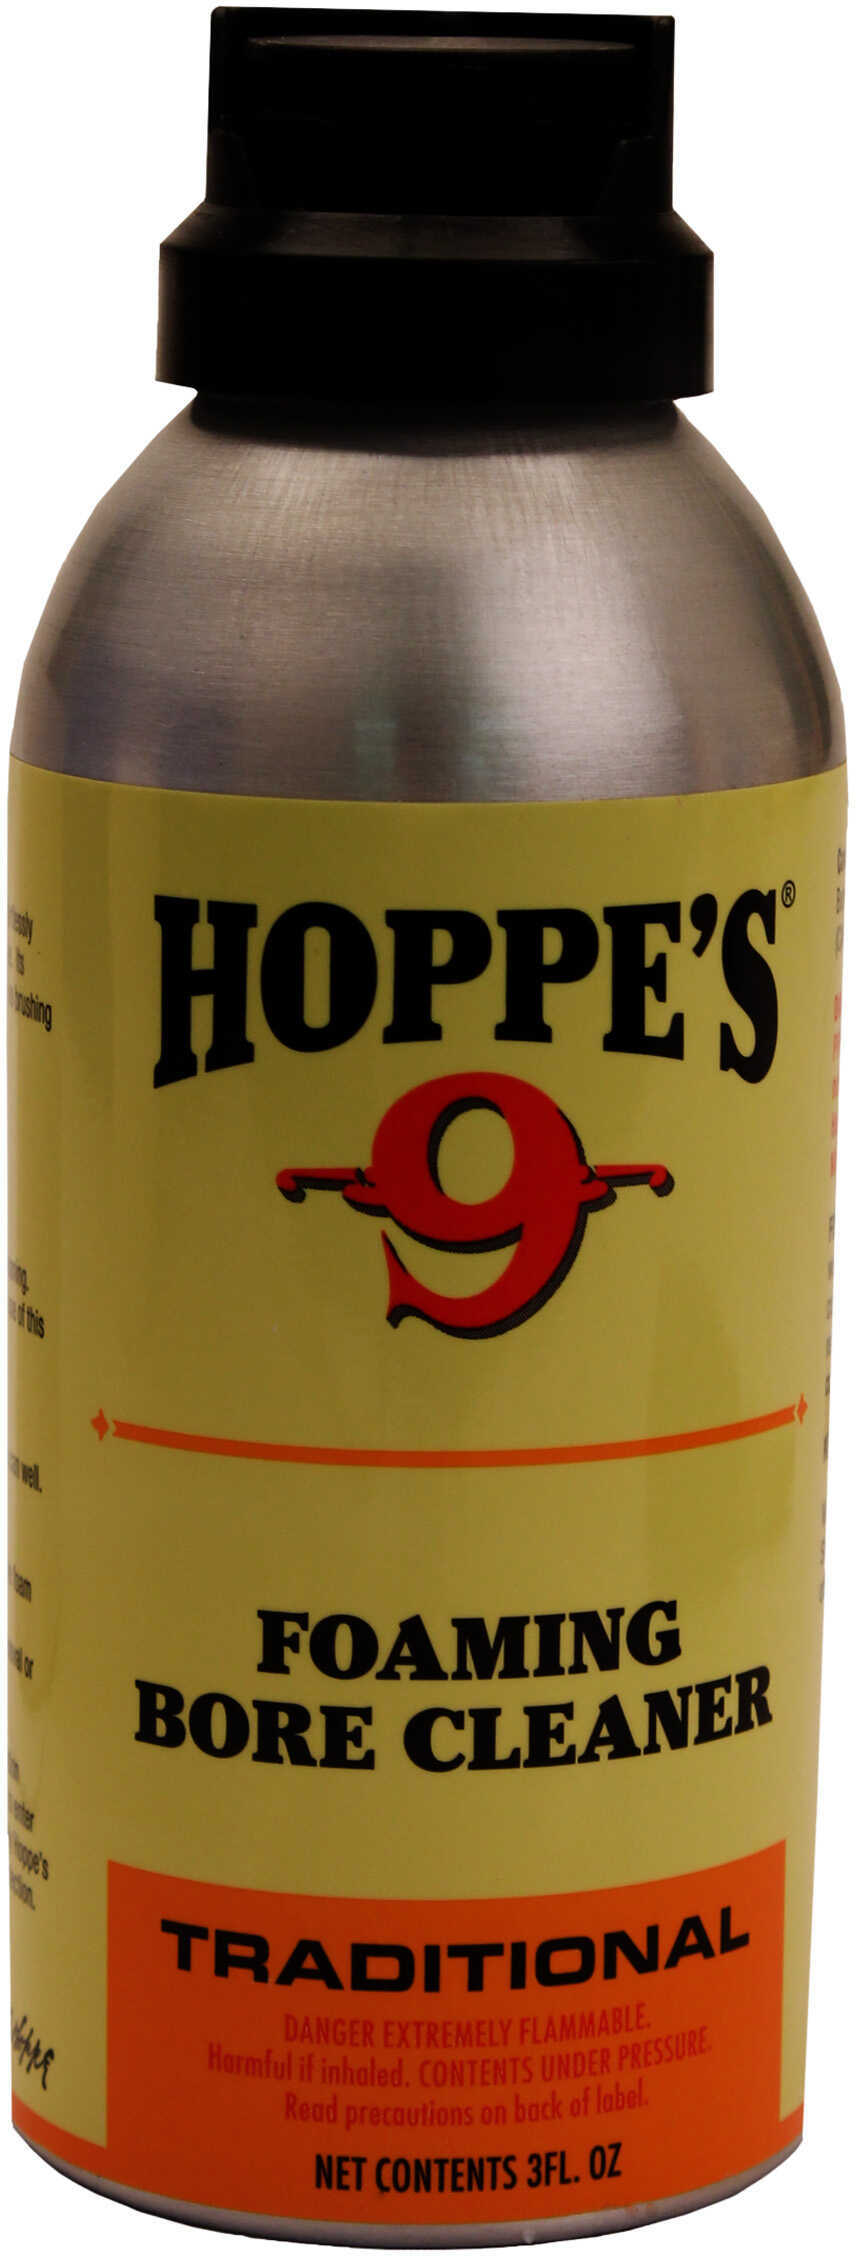 Hoppes 907 Foaming Bore Cleaner 3 oz Md: